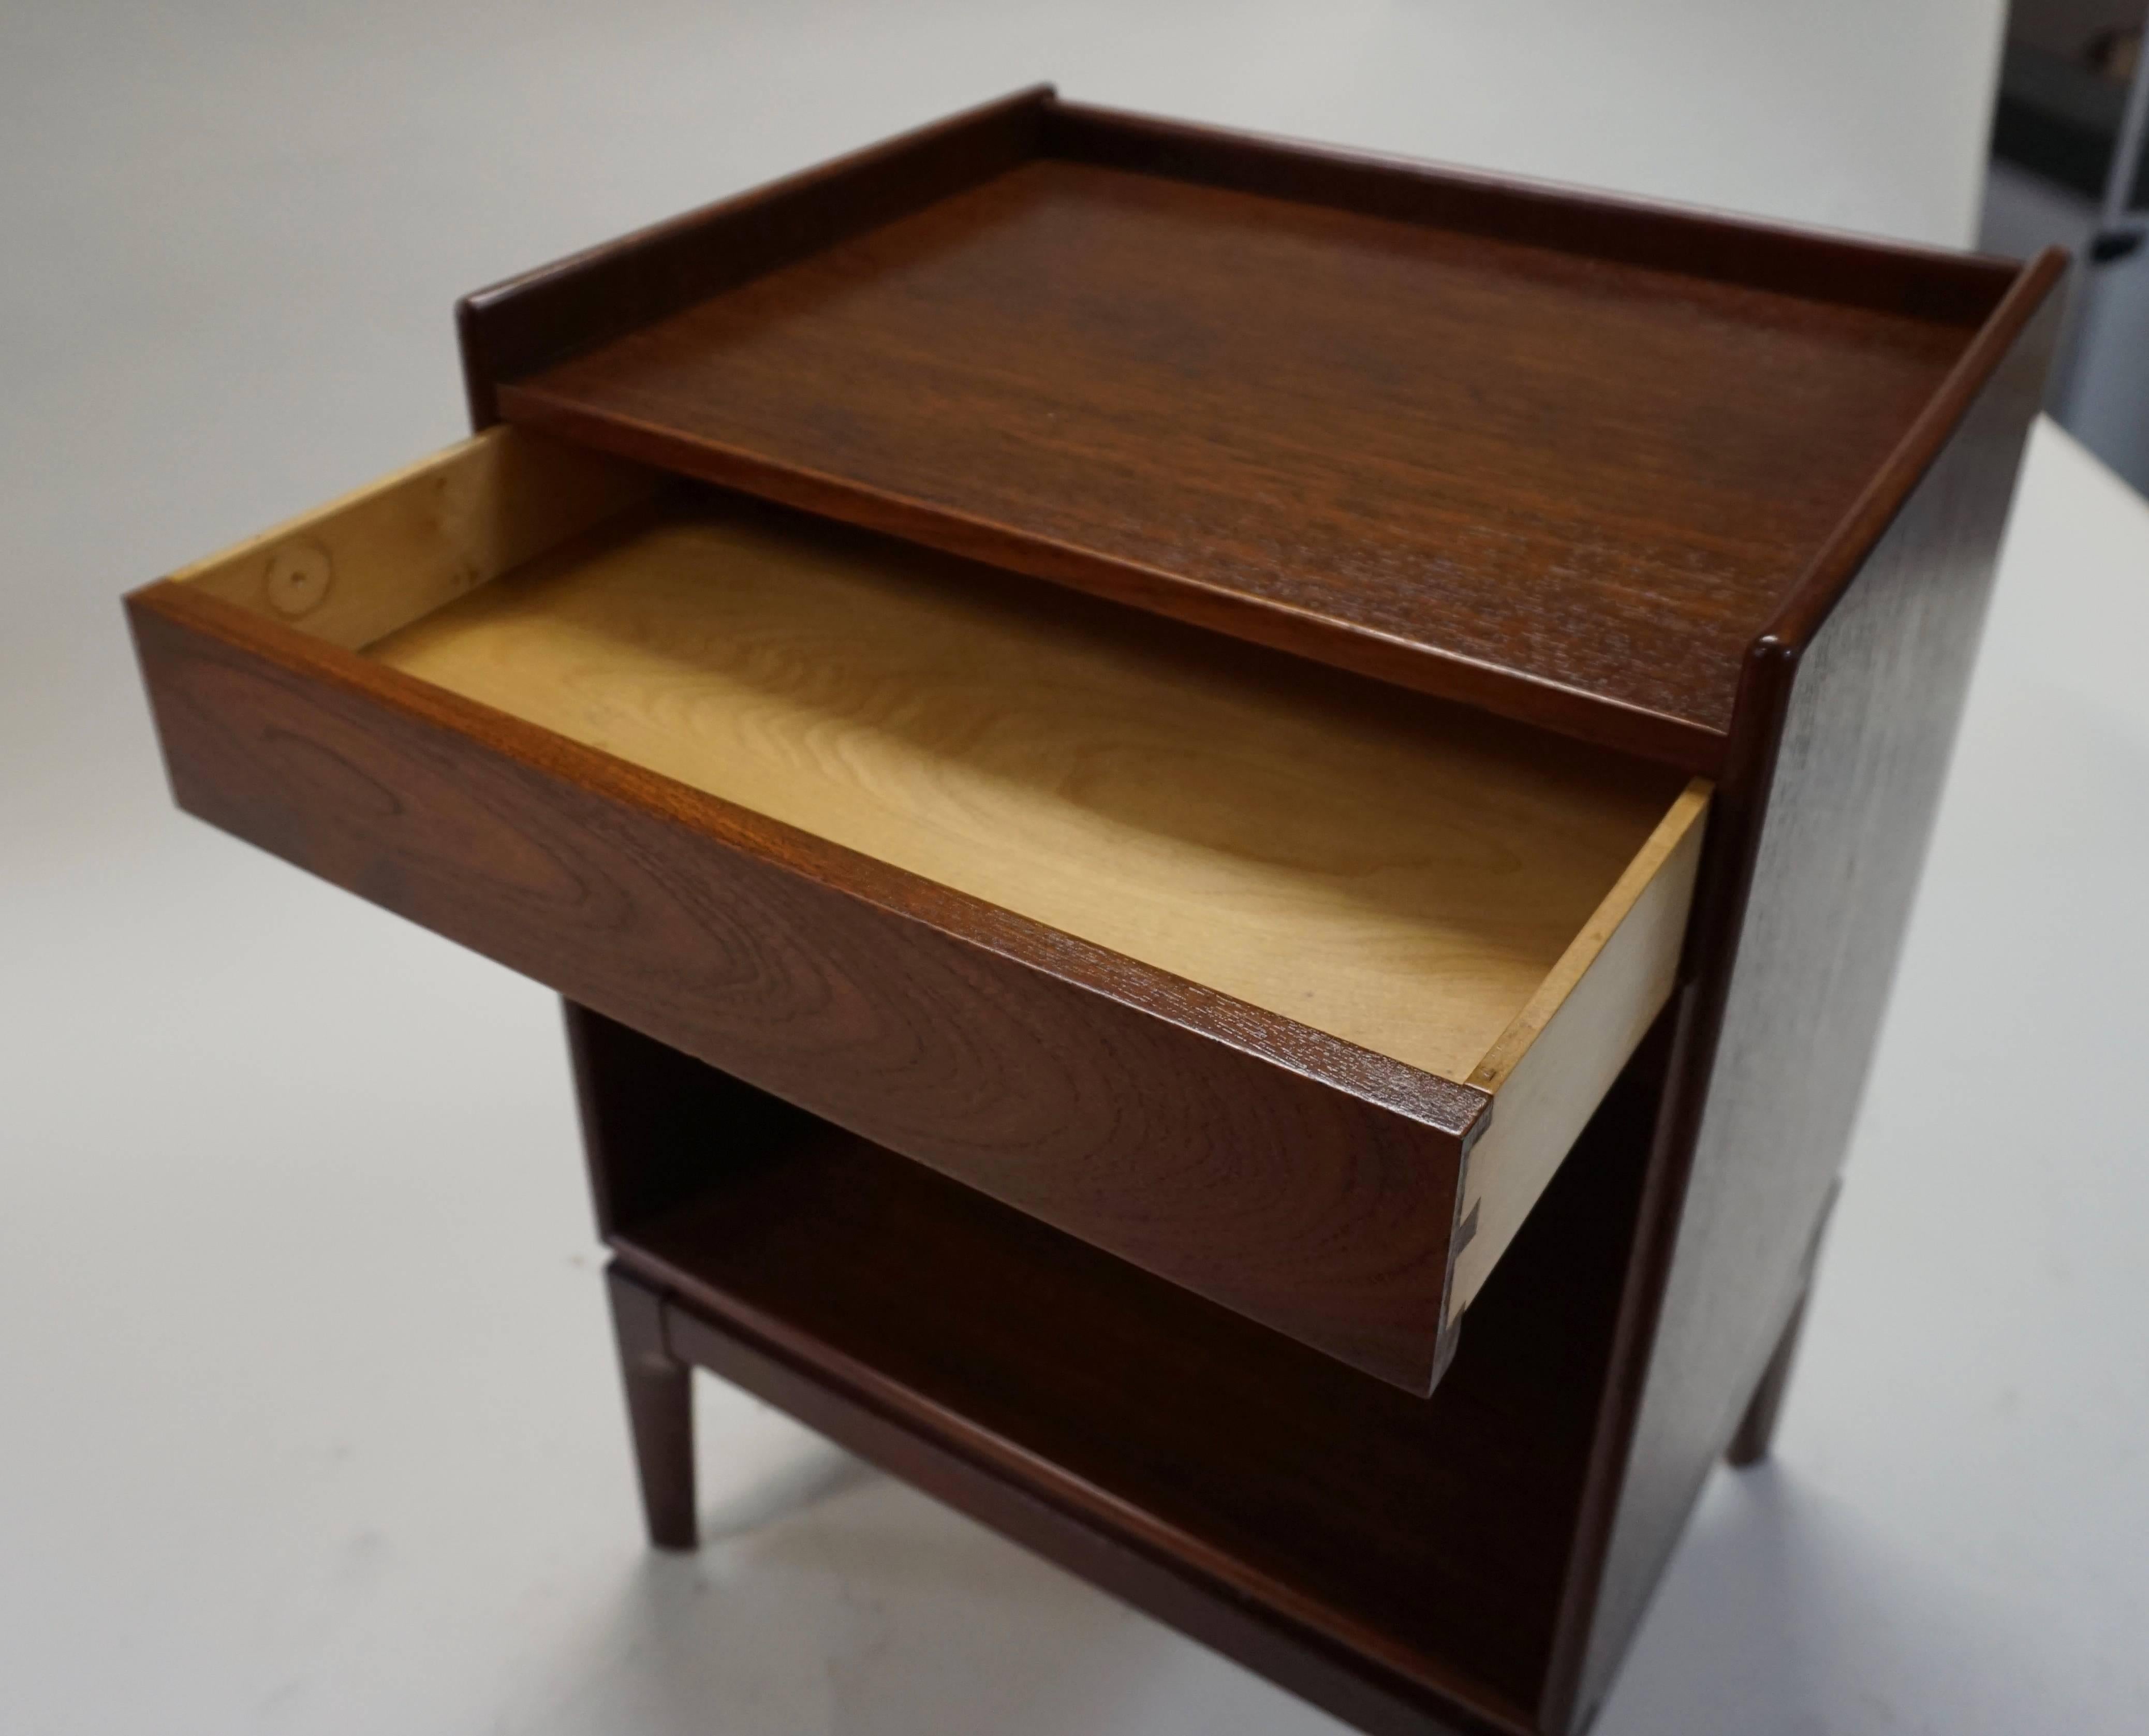 Made in Denmark. Imported by John Stuart. Excellent restored condition. One-drawer. Backs are finished. Signed on bottom.